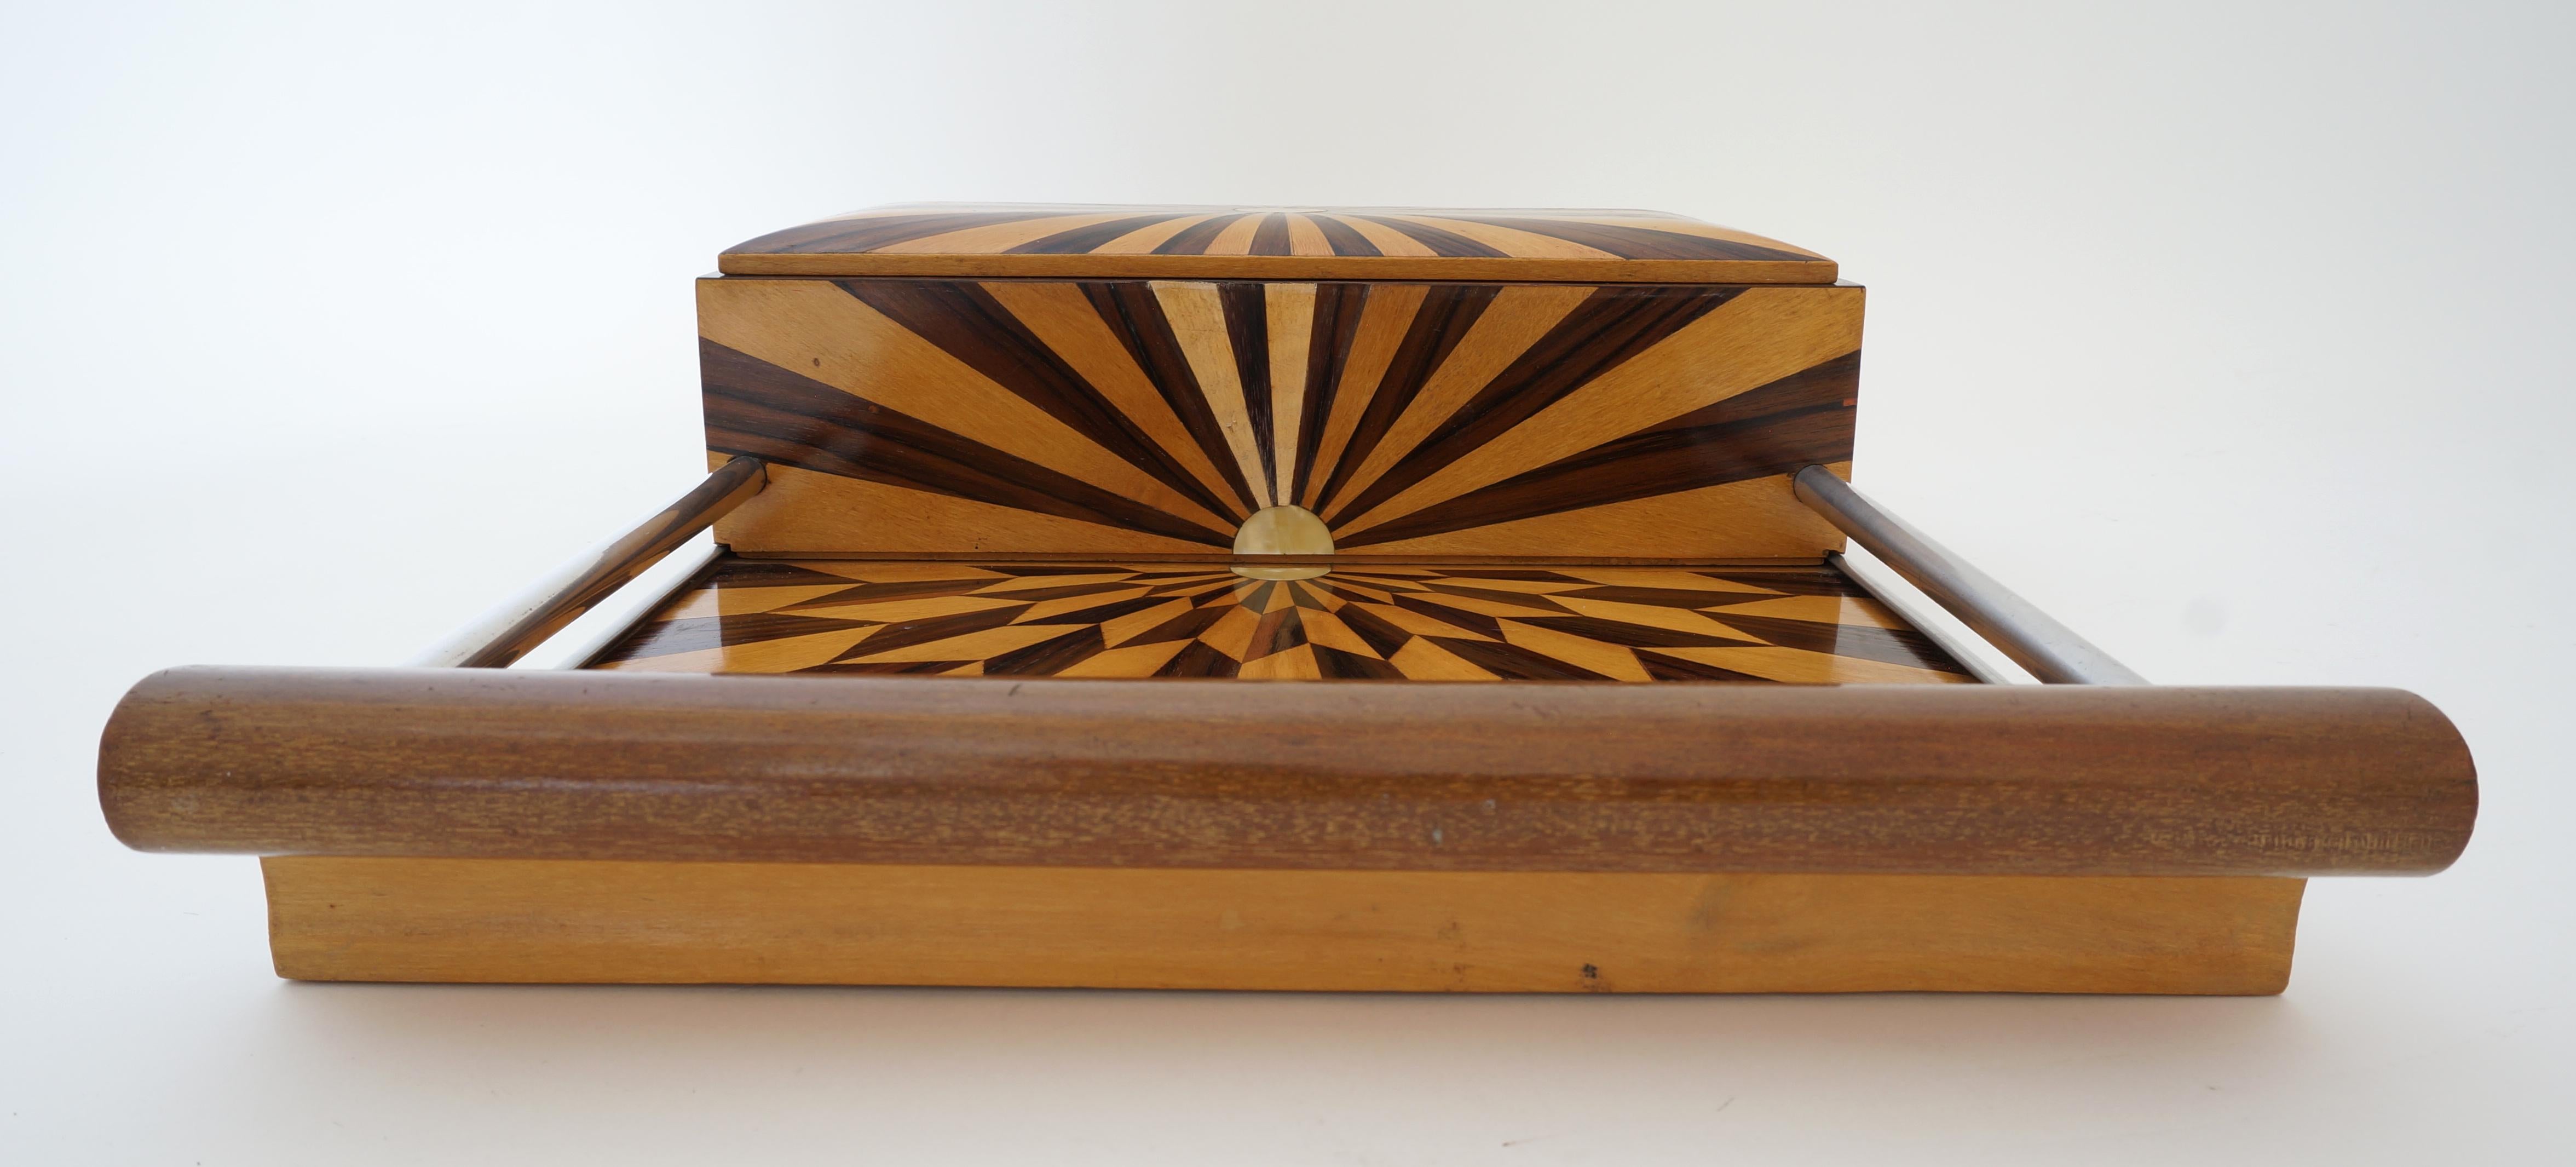 20th Century Art Deco Serving Tray by Paul Giordano